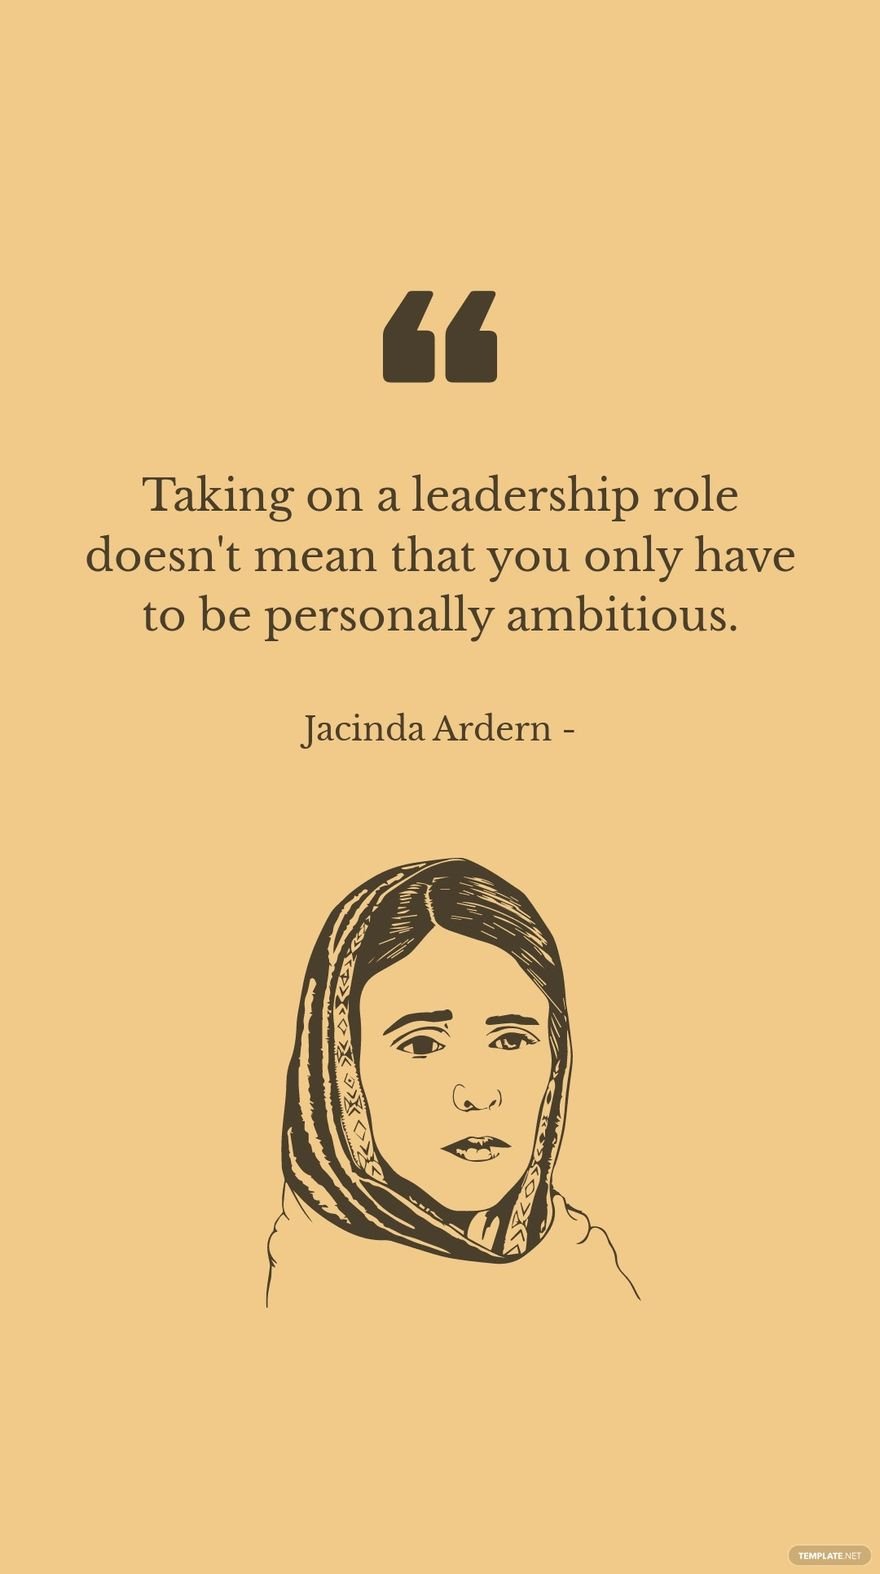 Jacinda Ardern - Taking on a leadership role doesn't mean that you only have to be personally ambitious.